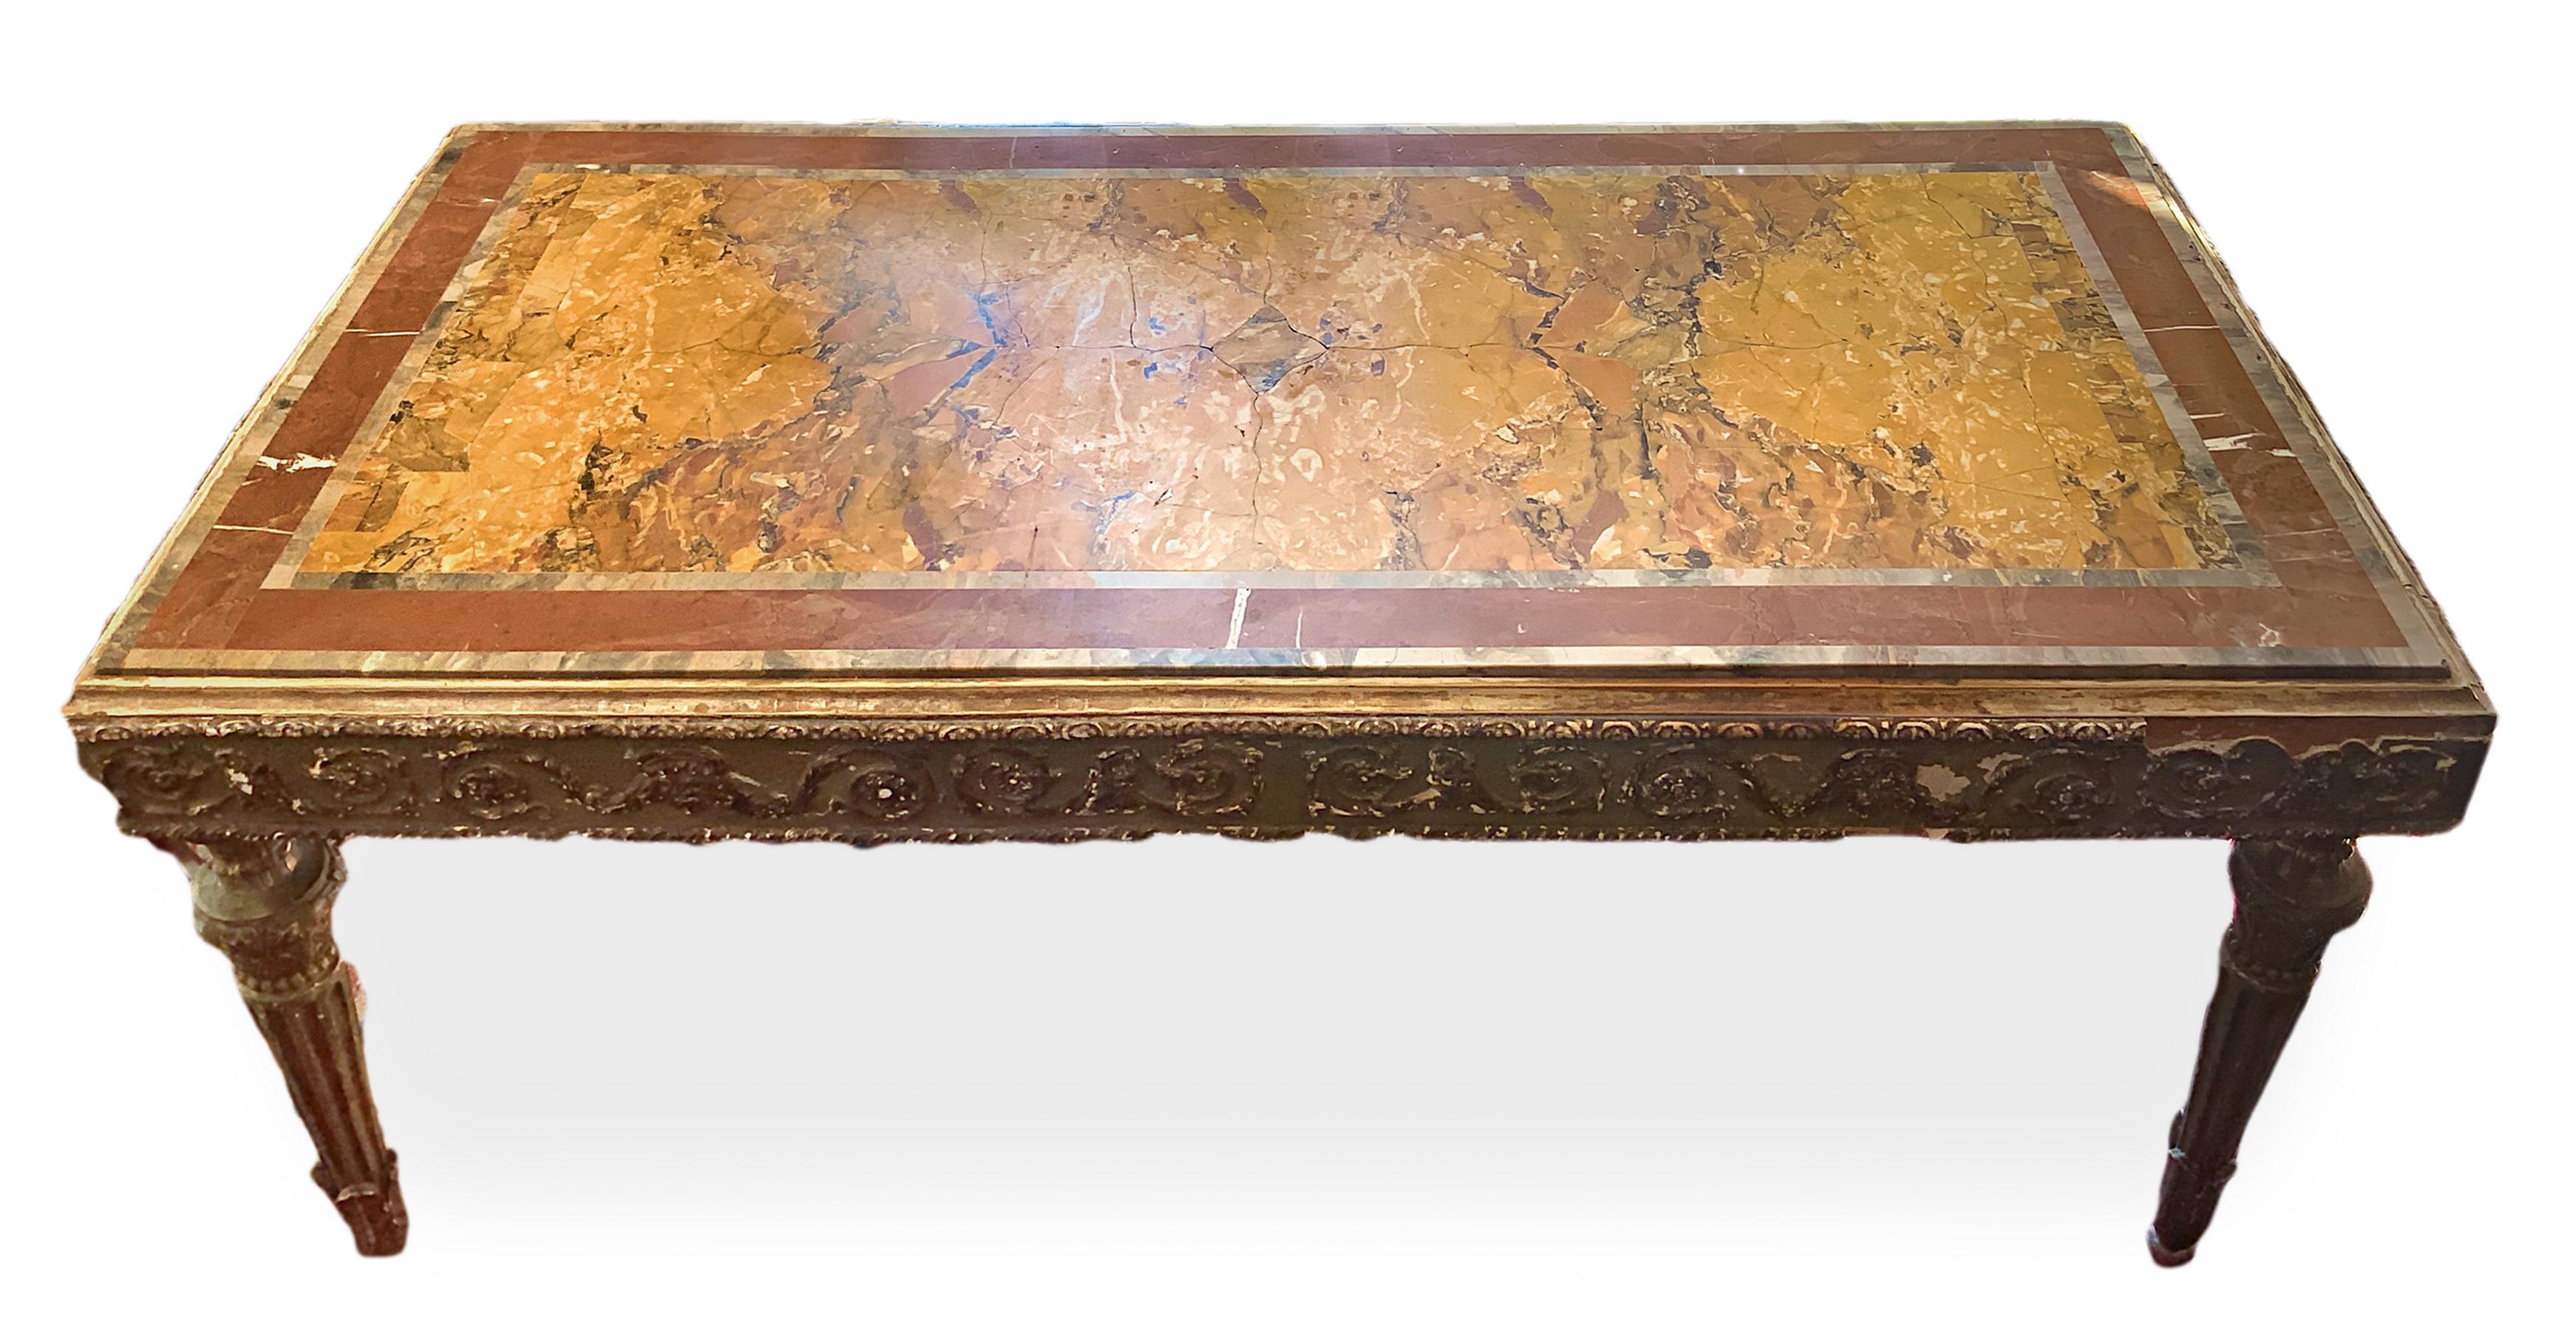 Green lacquered table with yellow Siena marble, early nineteenth century. H 81x180 cm, depth 90 - Image 2 of 4